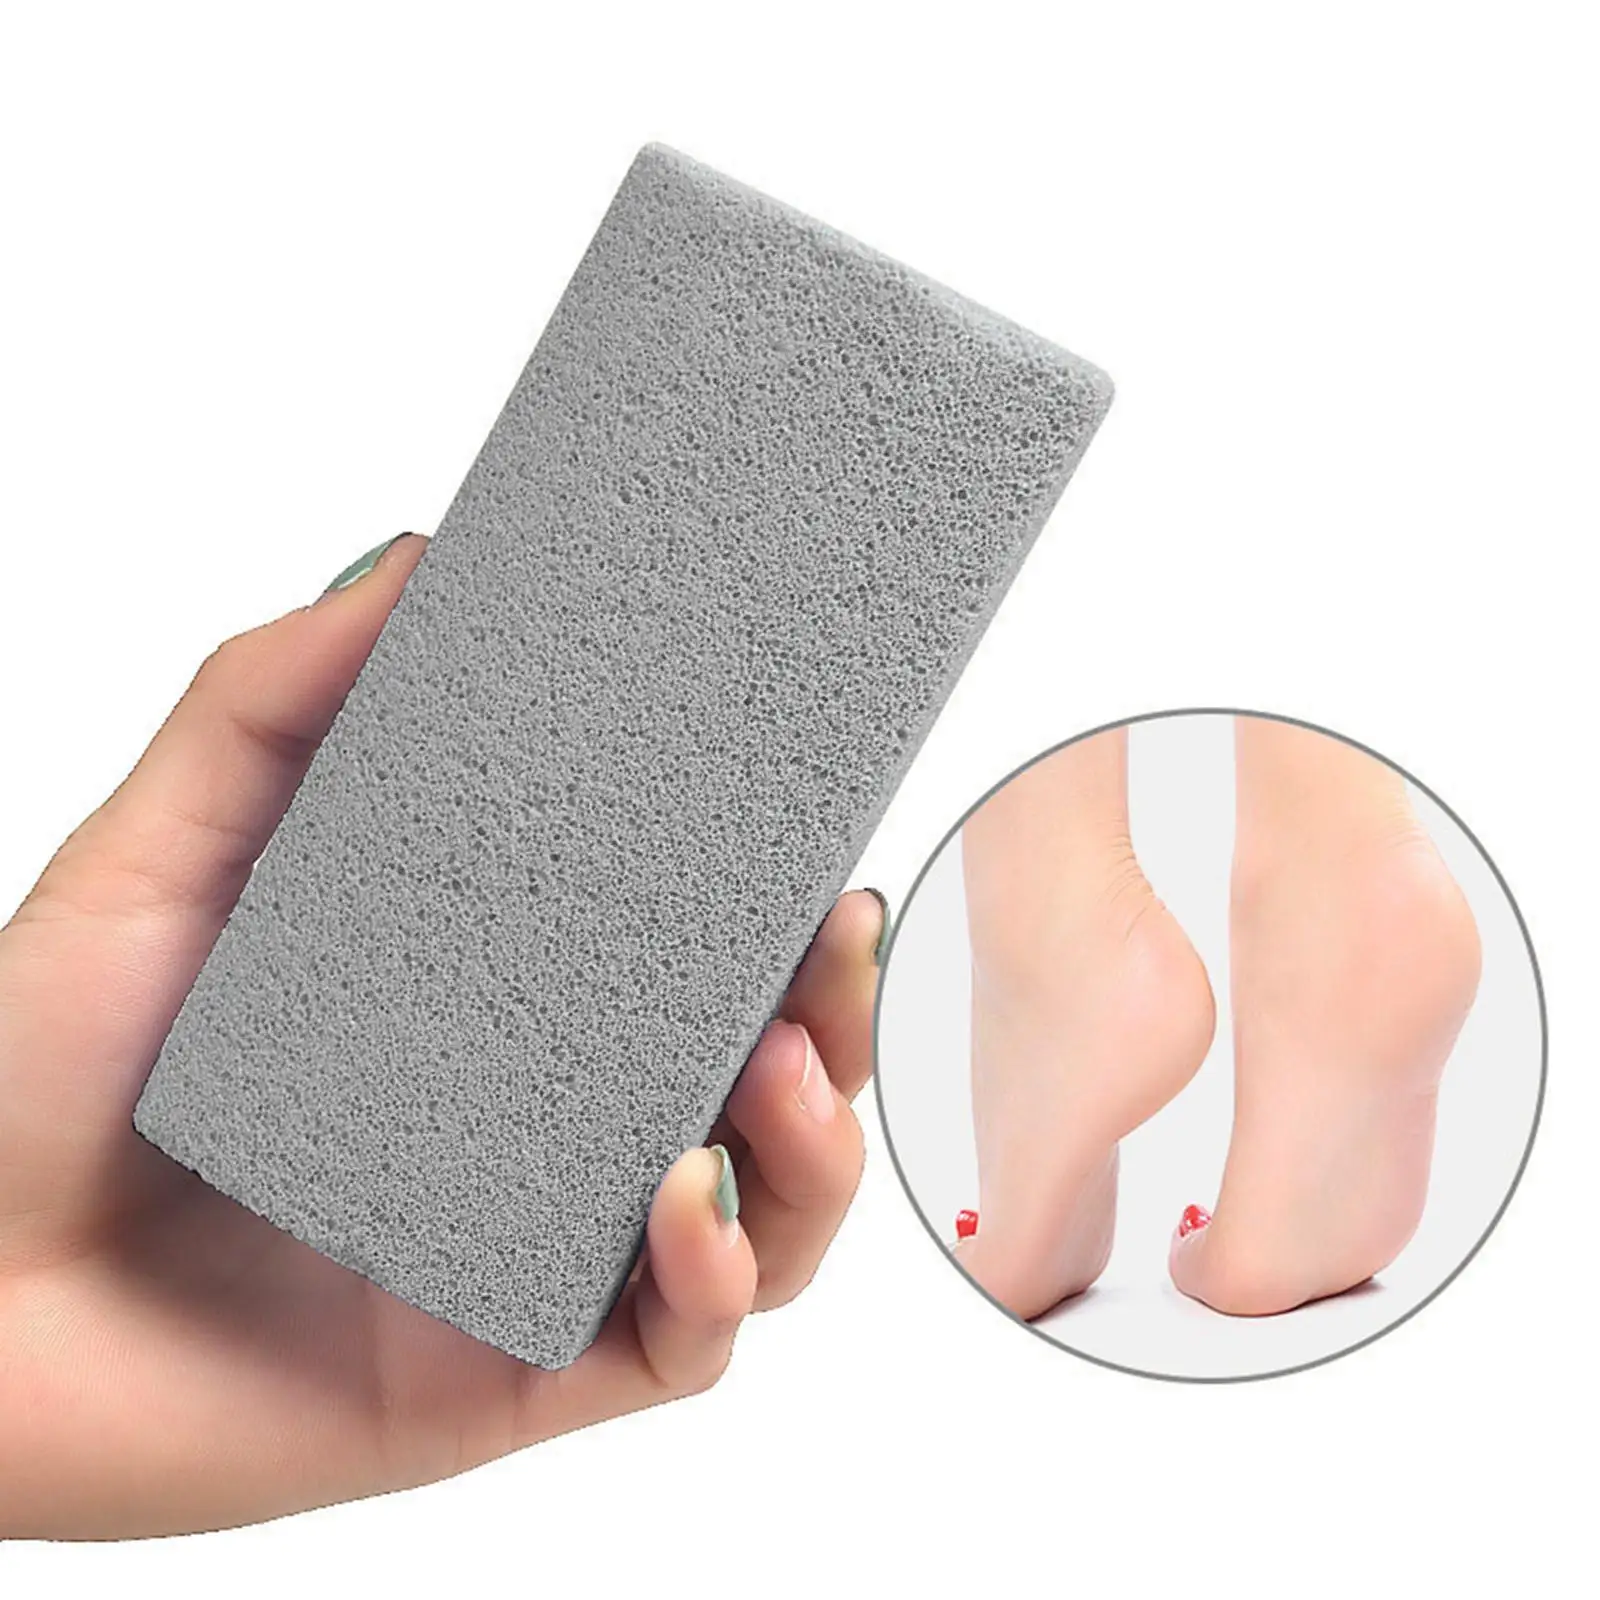 Double Sided Cuboid Foot Pumice Stones Exfoliator Foam Callus Remover Foot Scrubber for Dead Hard Skin Remover Pedicure Tools